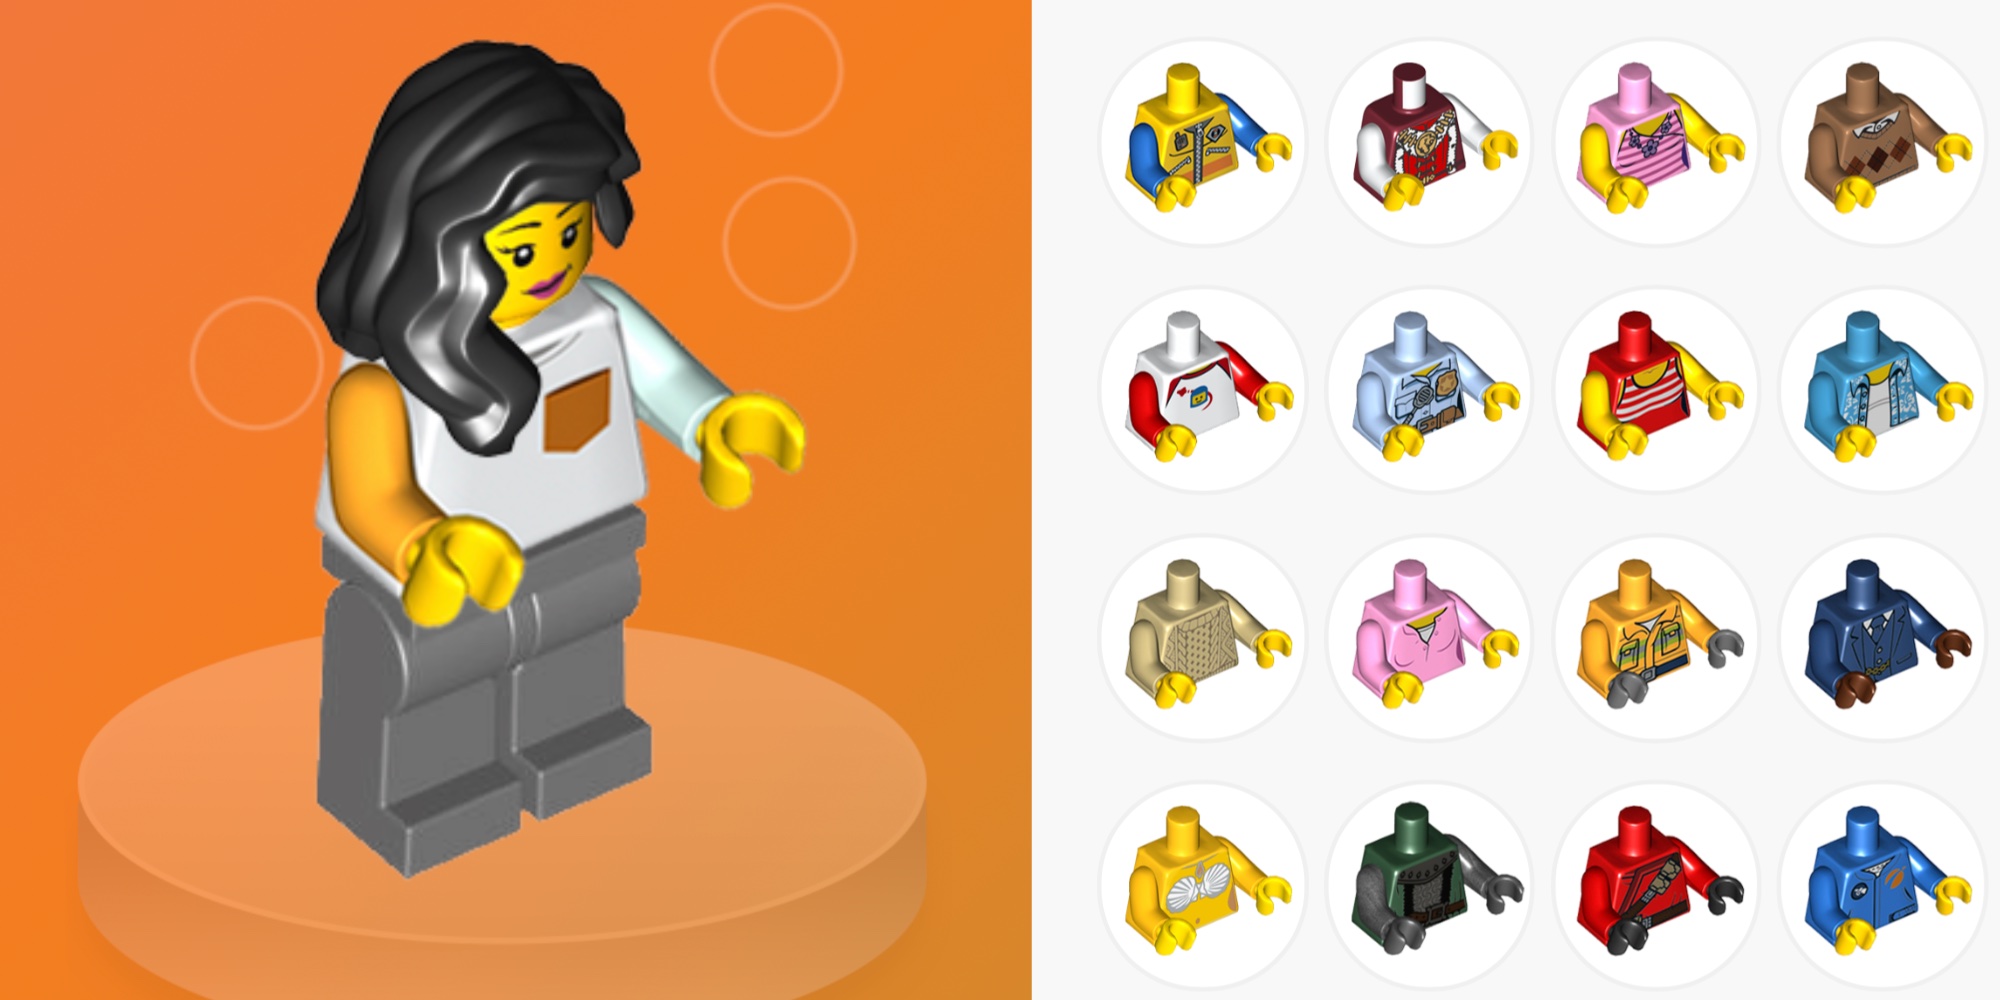 LEGO Build a Minifigure beta launches - 9to5Toys